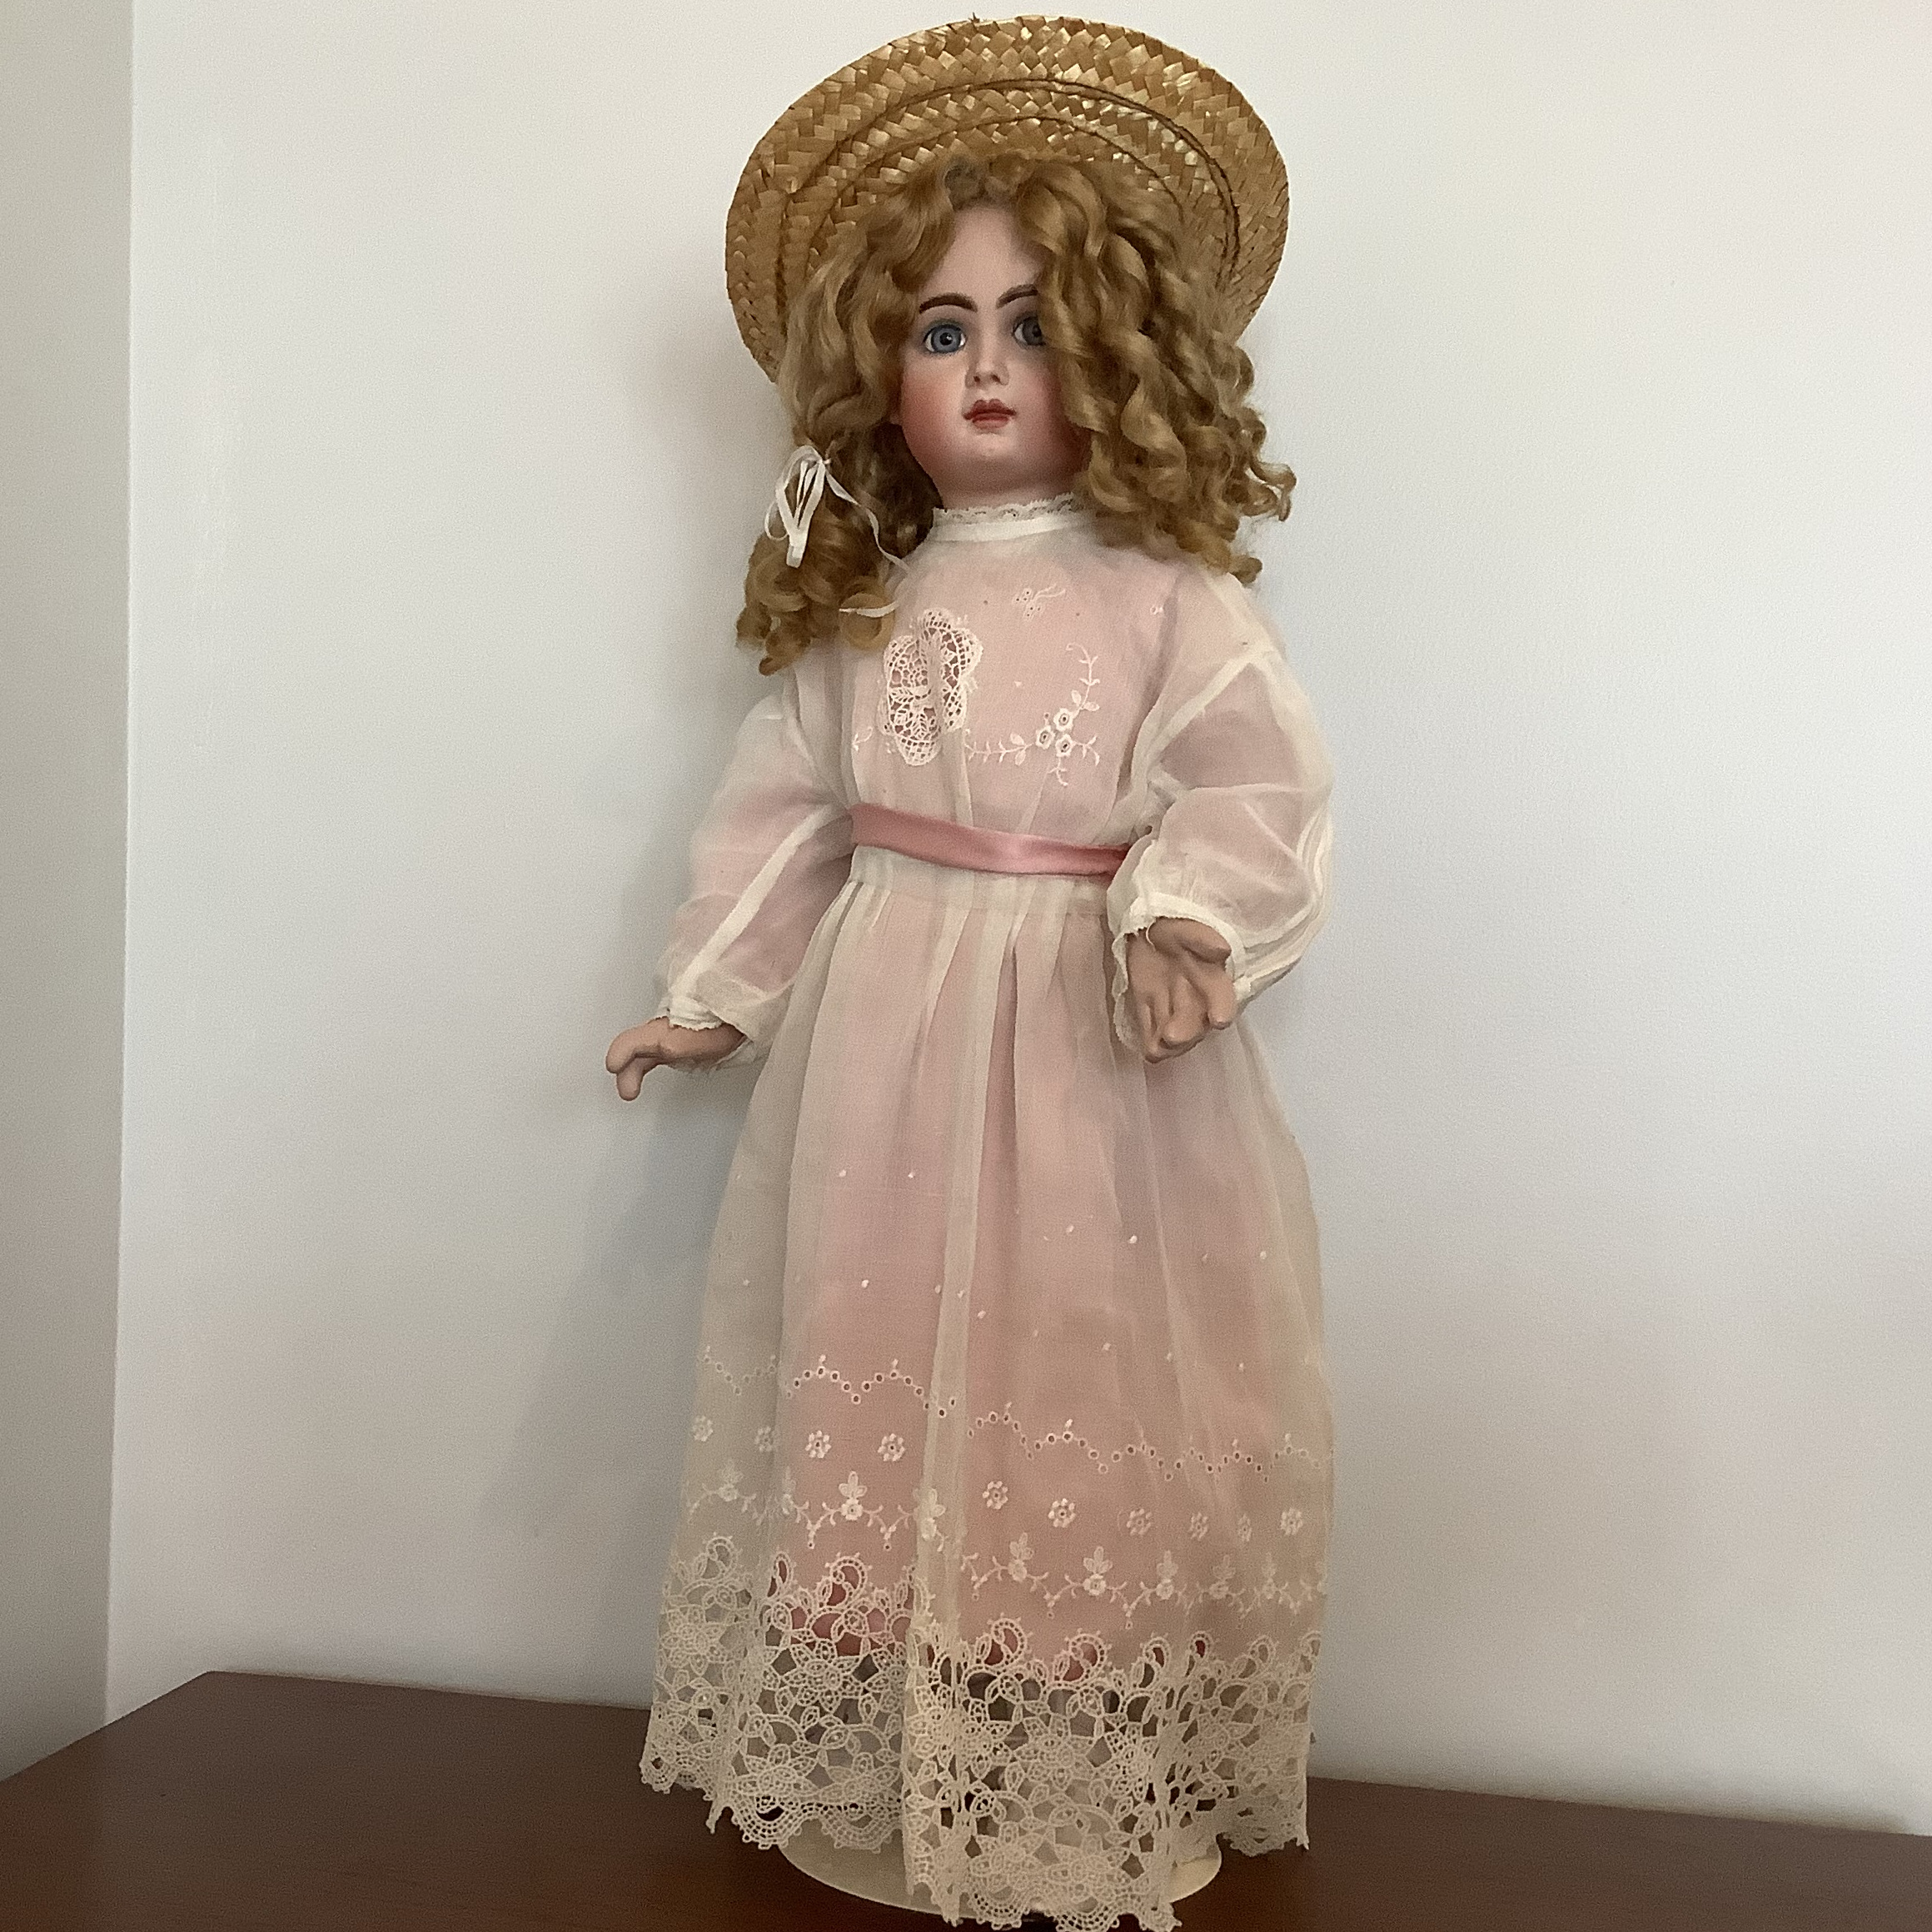 Reproduction Jumeau Arielle in a pink and white dress with embroidery and cutwork